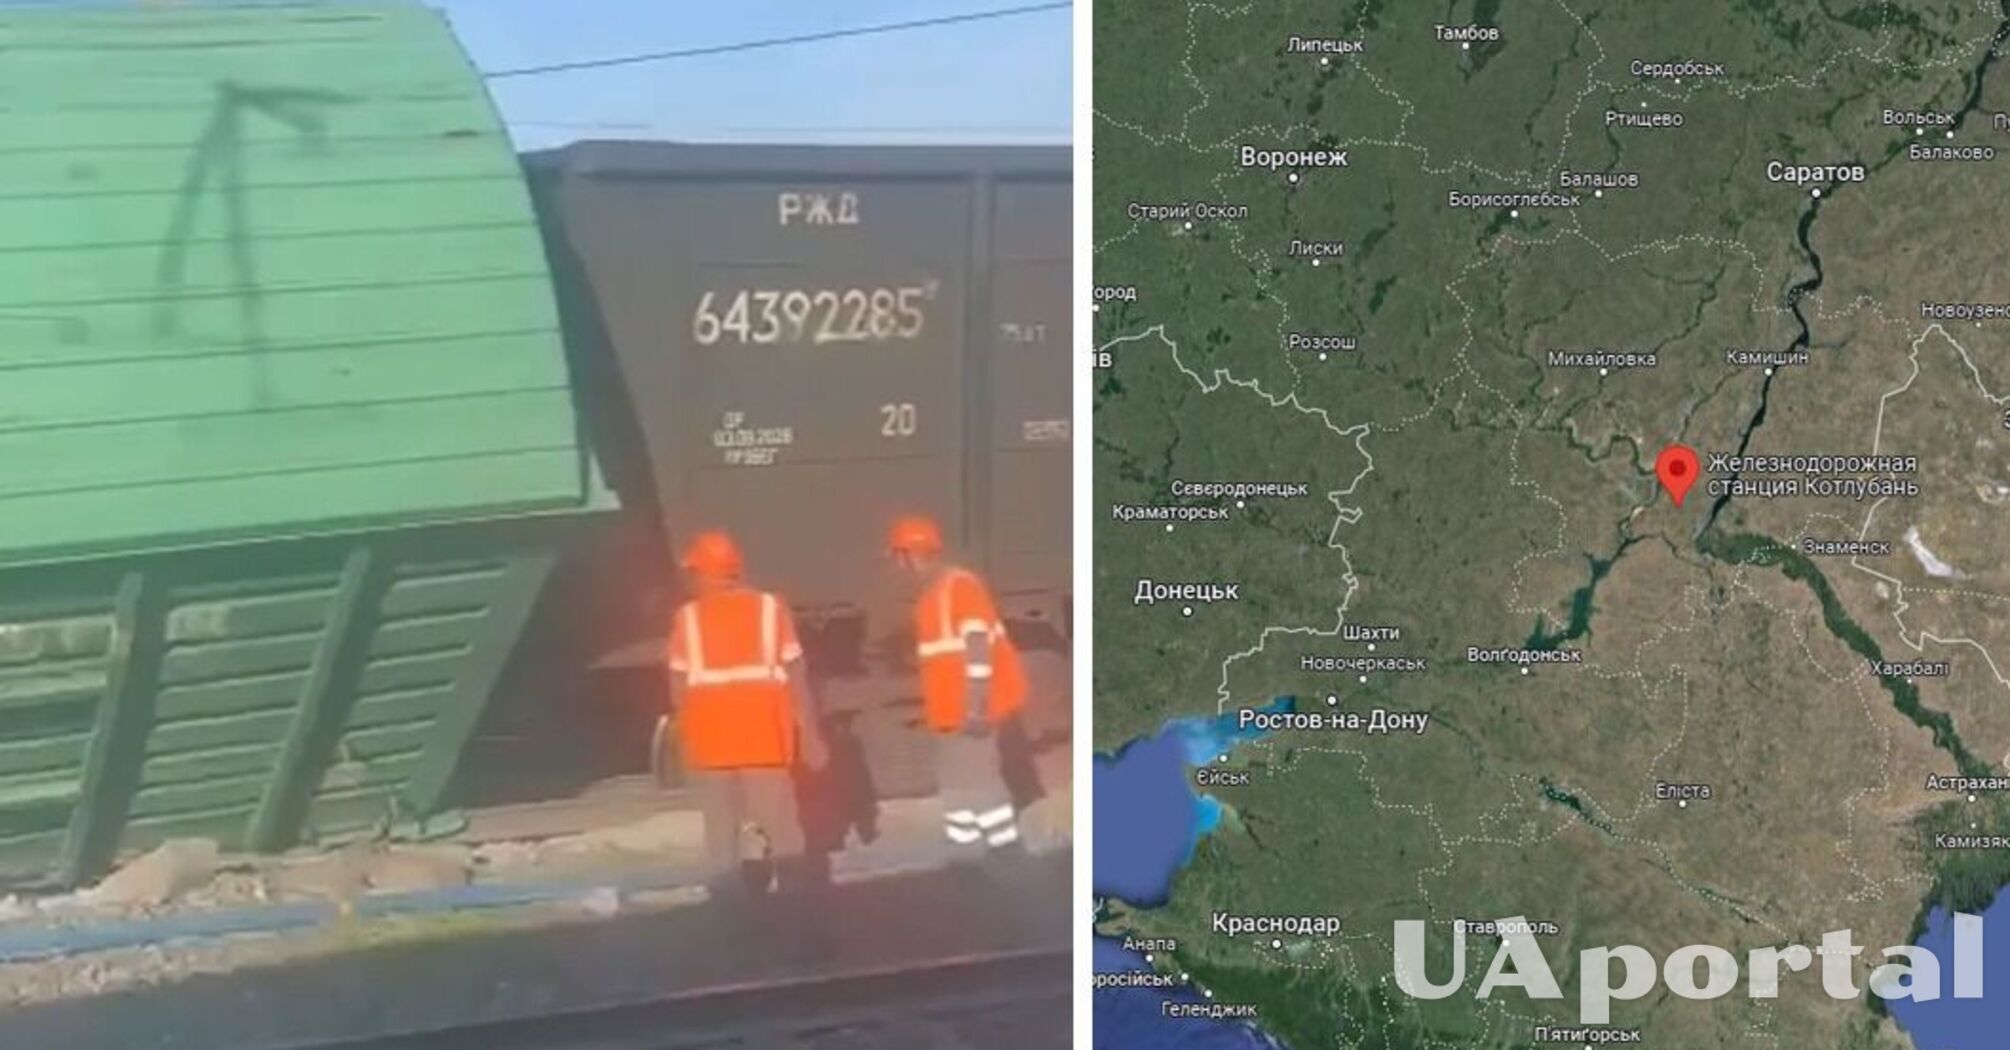 UAVs derailed a freight train with fuel at the Kotluban station in Volgograd (photo, video)